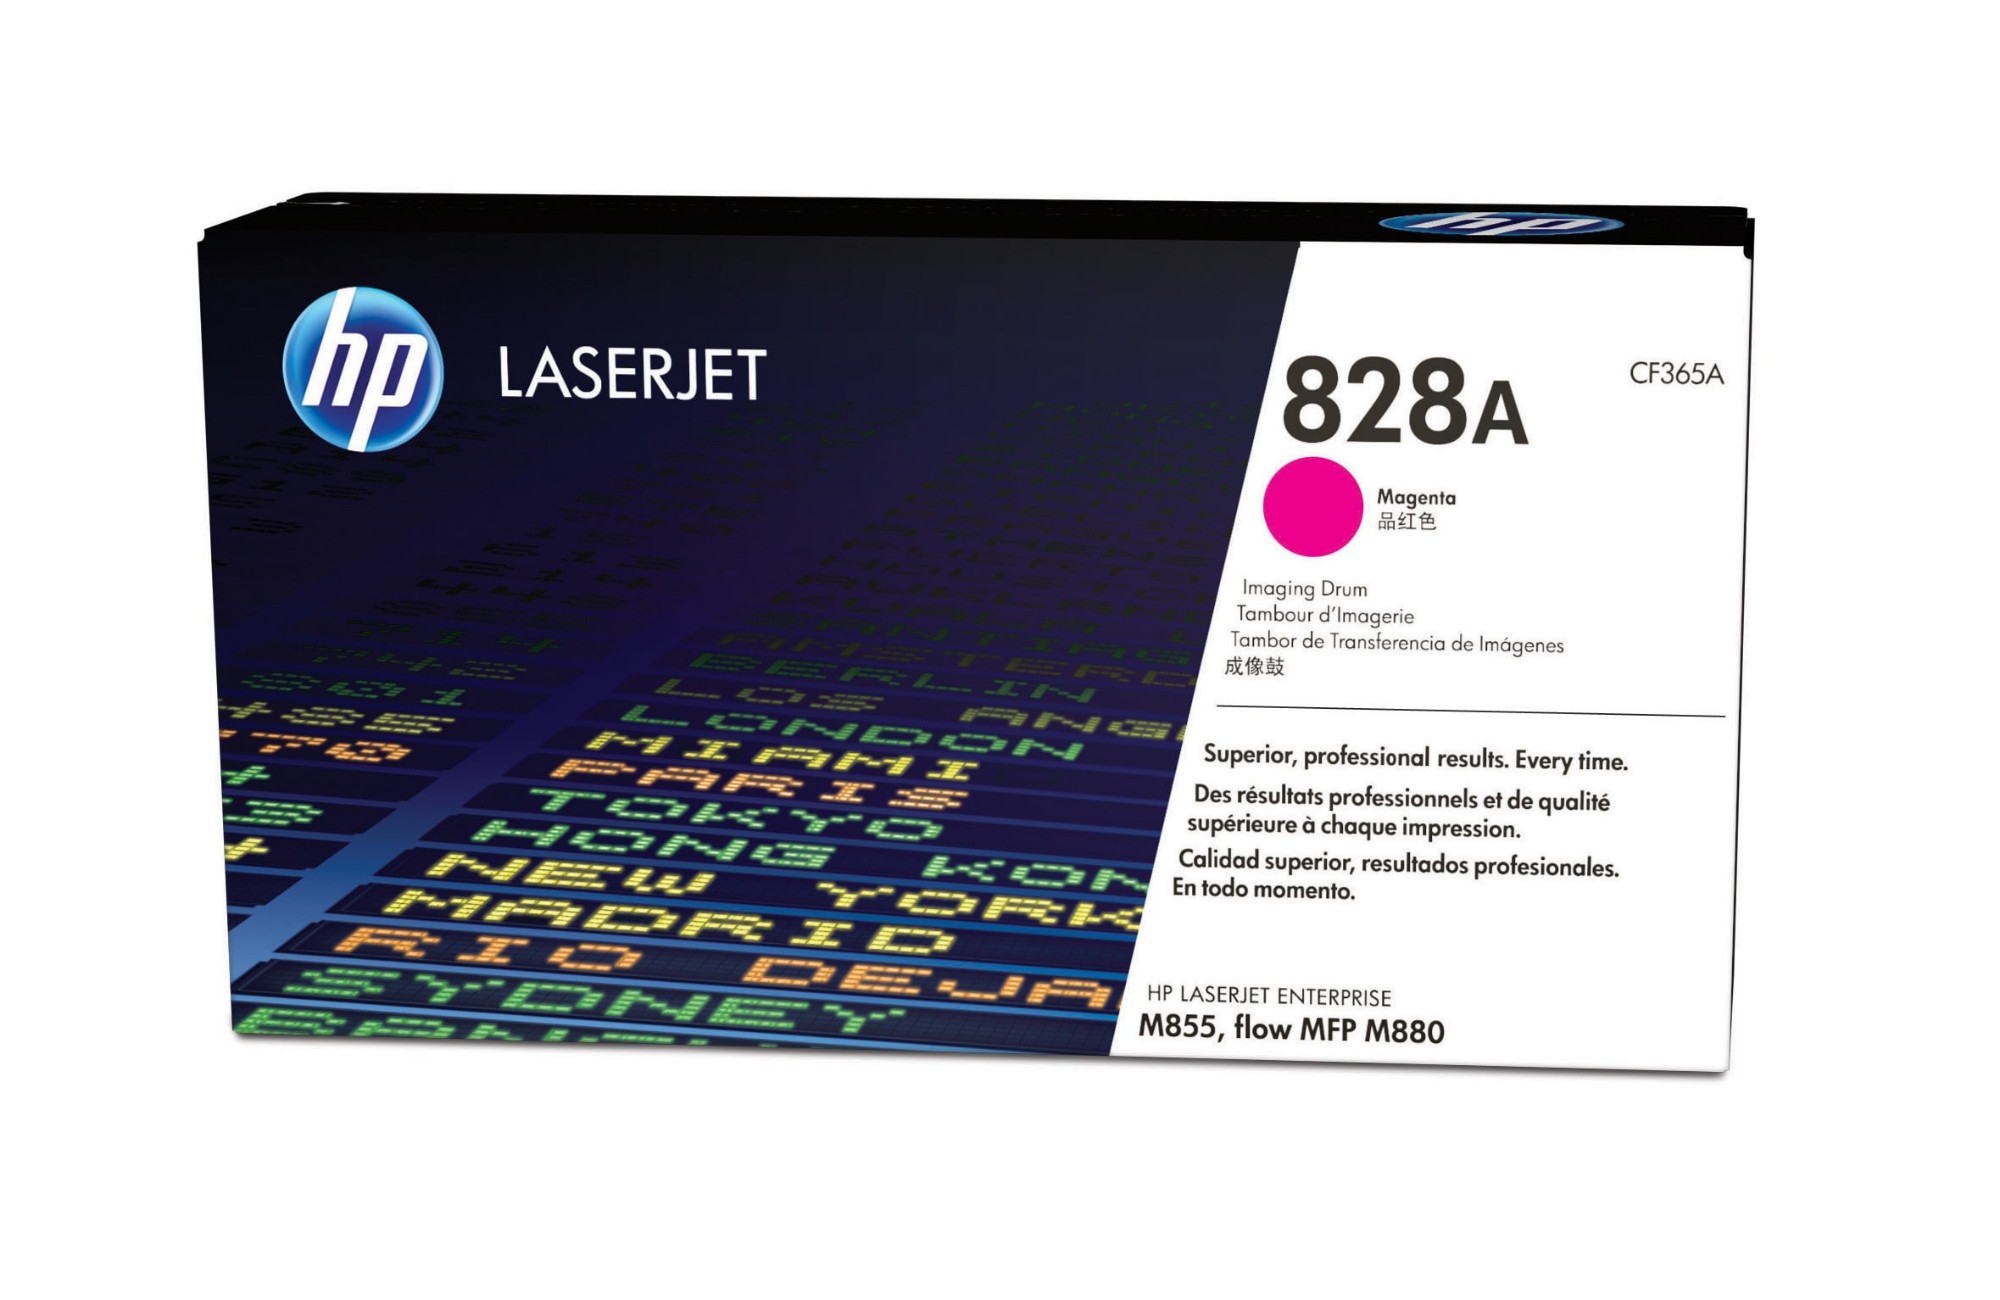 Photos - Ink & Toner Cartridge HP CF365A/828A Drum kit magenta, 30K pages ISO/IEC 19798 for  Color 